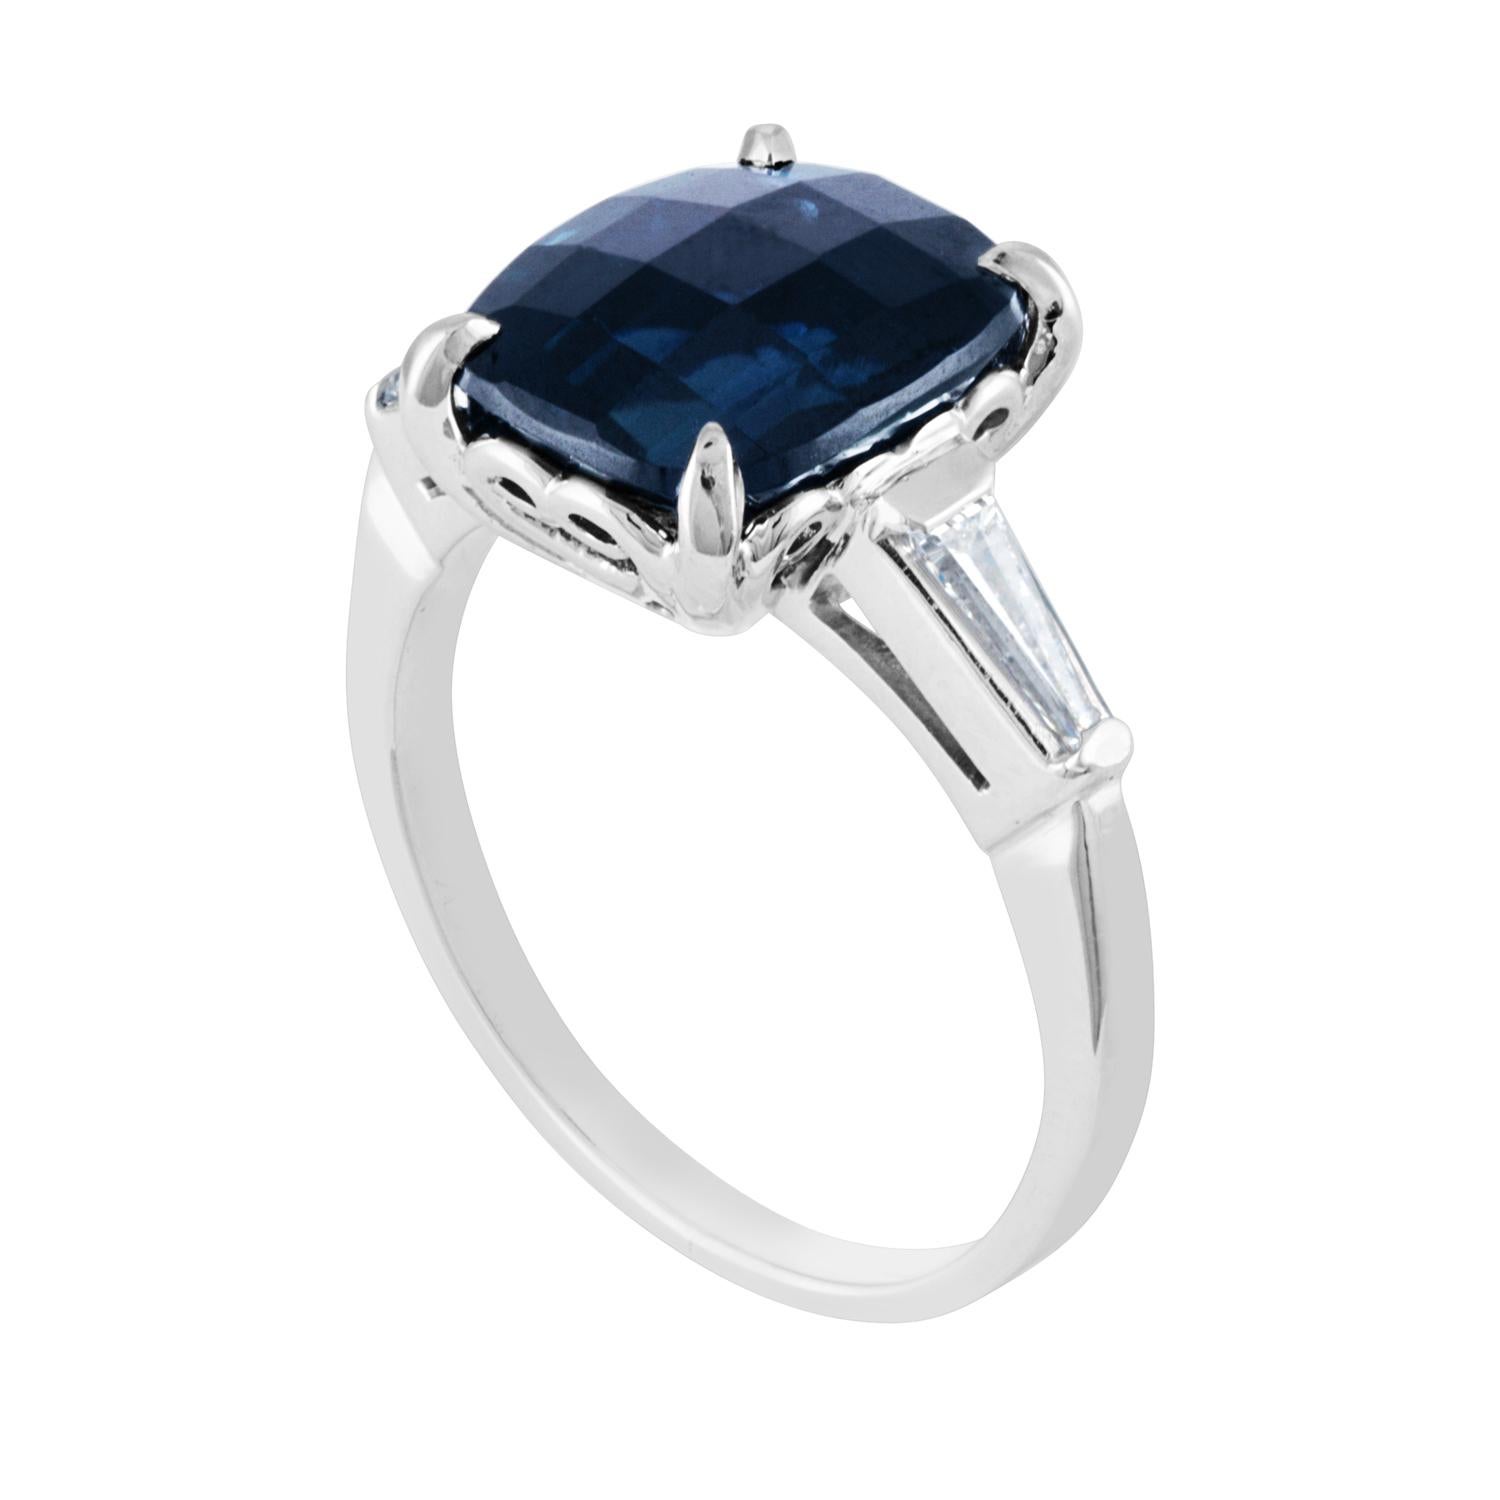 Beautiful Blue Sapphire Ring.
The ring is Platinum & 14K White Gold.
This is an Australian Blue Sapphire 5.54 Carats.
The Stone is a Cushion Checker Board Cut.
The stone is AGL Certified, Heated
There are 0.25 Carat Diamonds F VS
The ring is a size